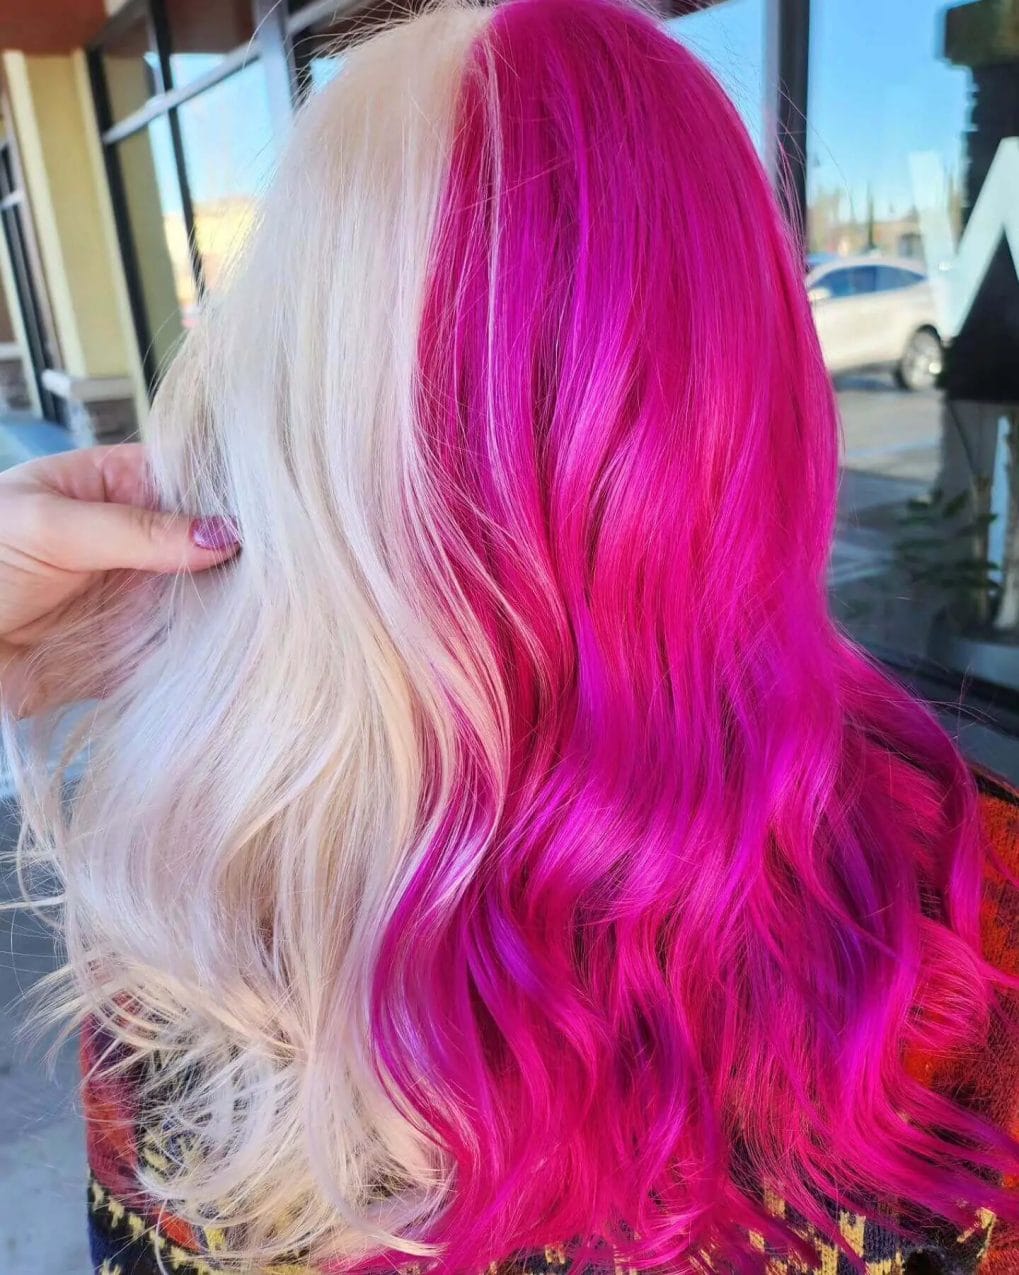 Hot pink and platinum sides split down the middle in a bold look